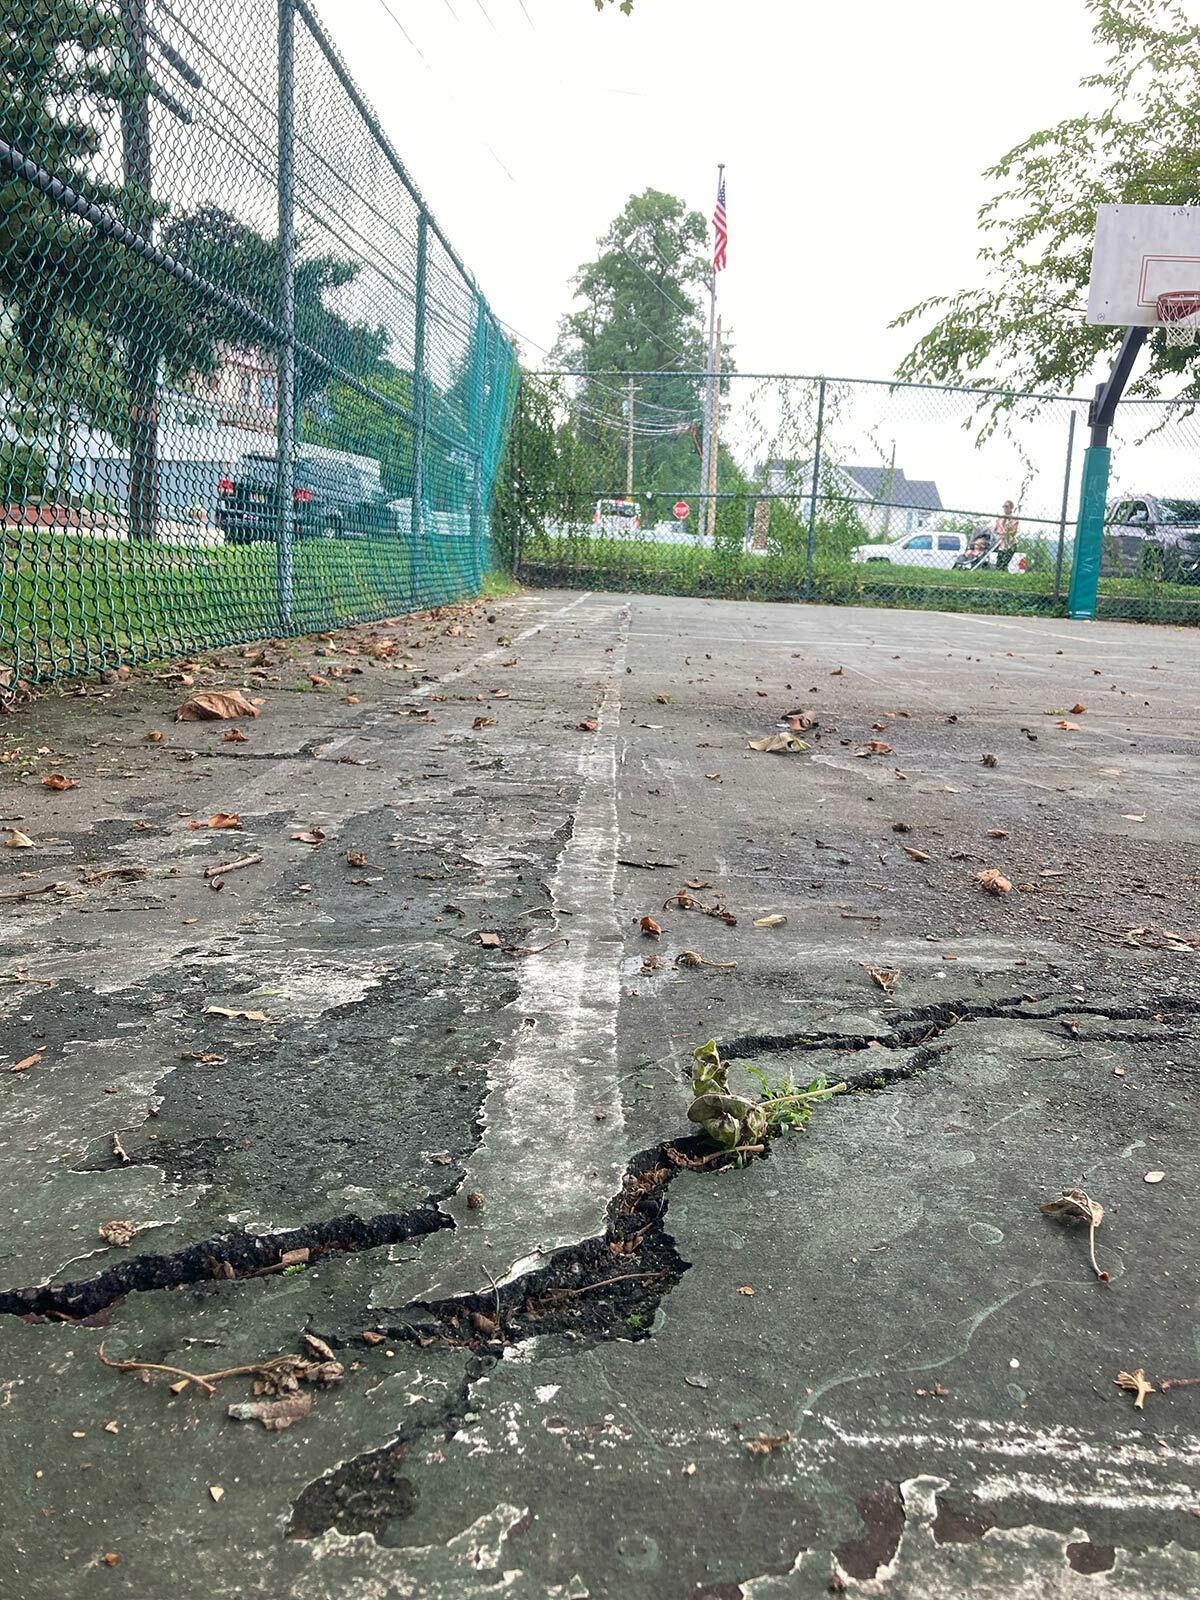 A closeup of cracks in the asphalt at the existing basketball court in Cow Harbor Park in Northport Village.